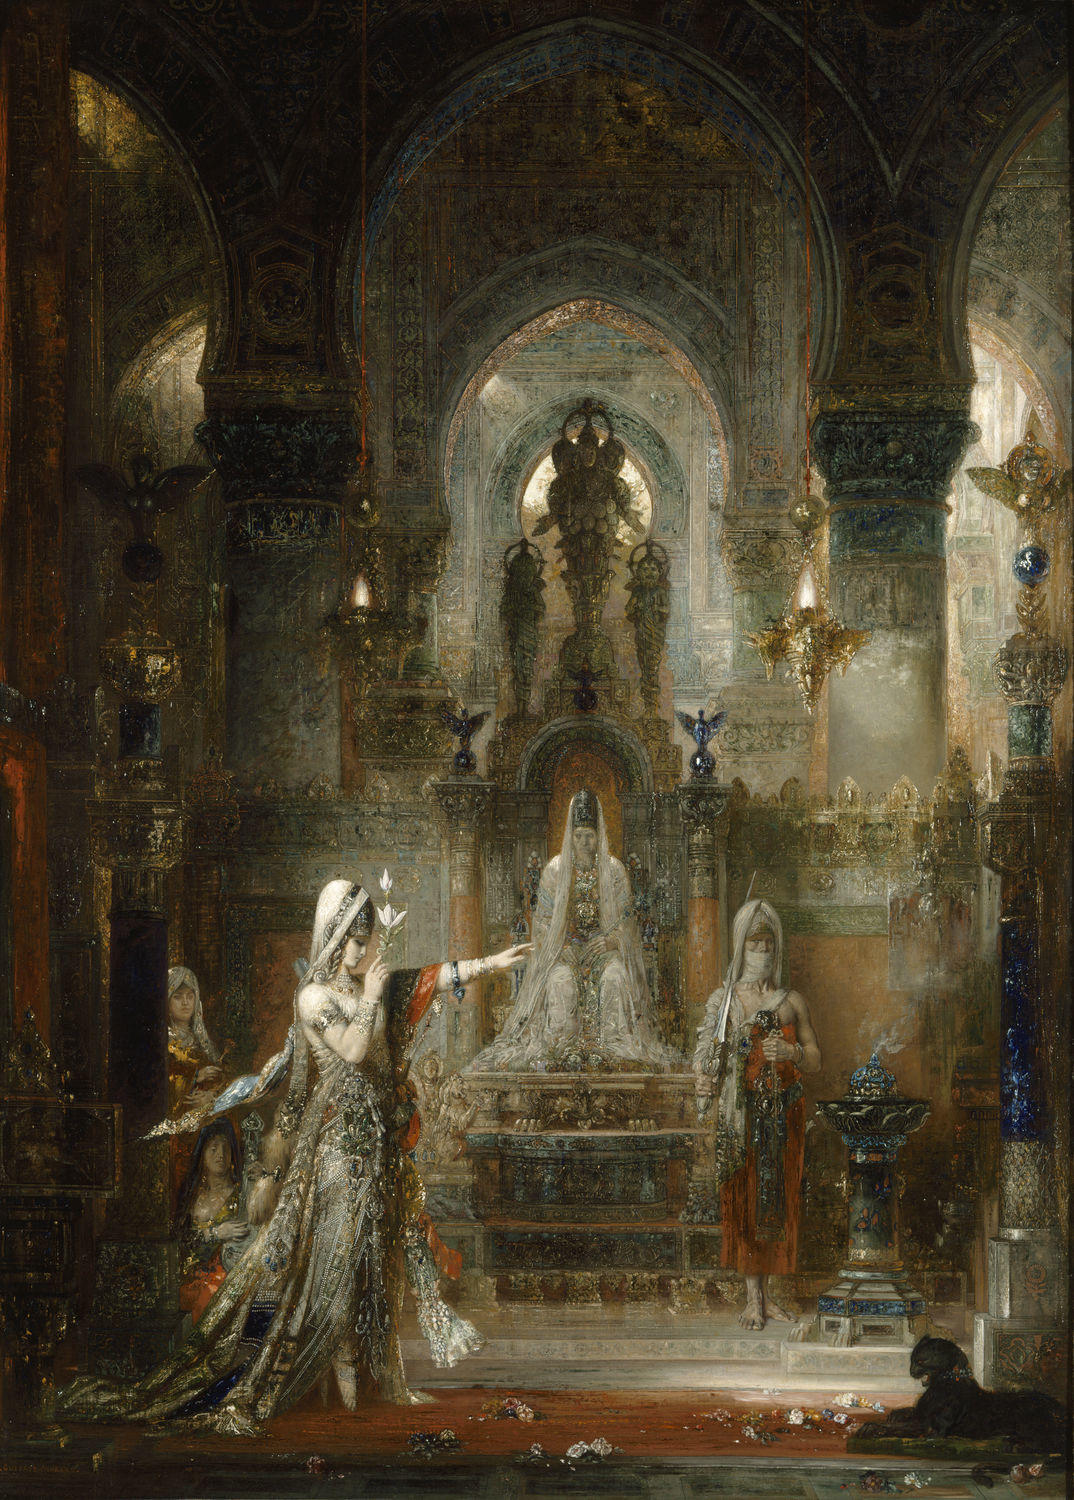 https://www.sartle.com/sites/default/files/styles/as-is/public/images/artwork/salome-dancing-before-herod-gustave-moreau-211881-4466056.jpg?itok=6pPCiY4m